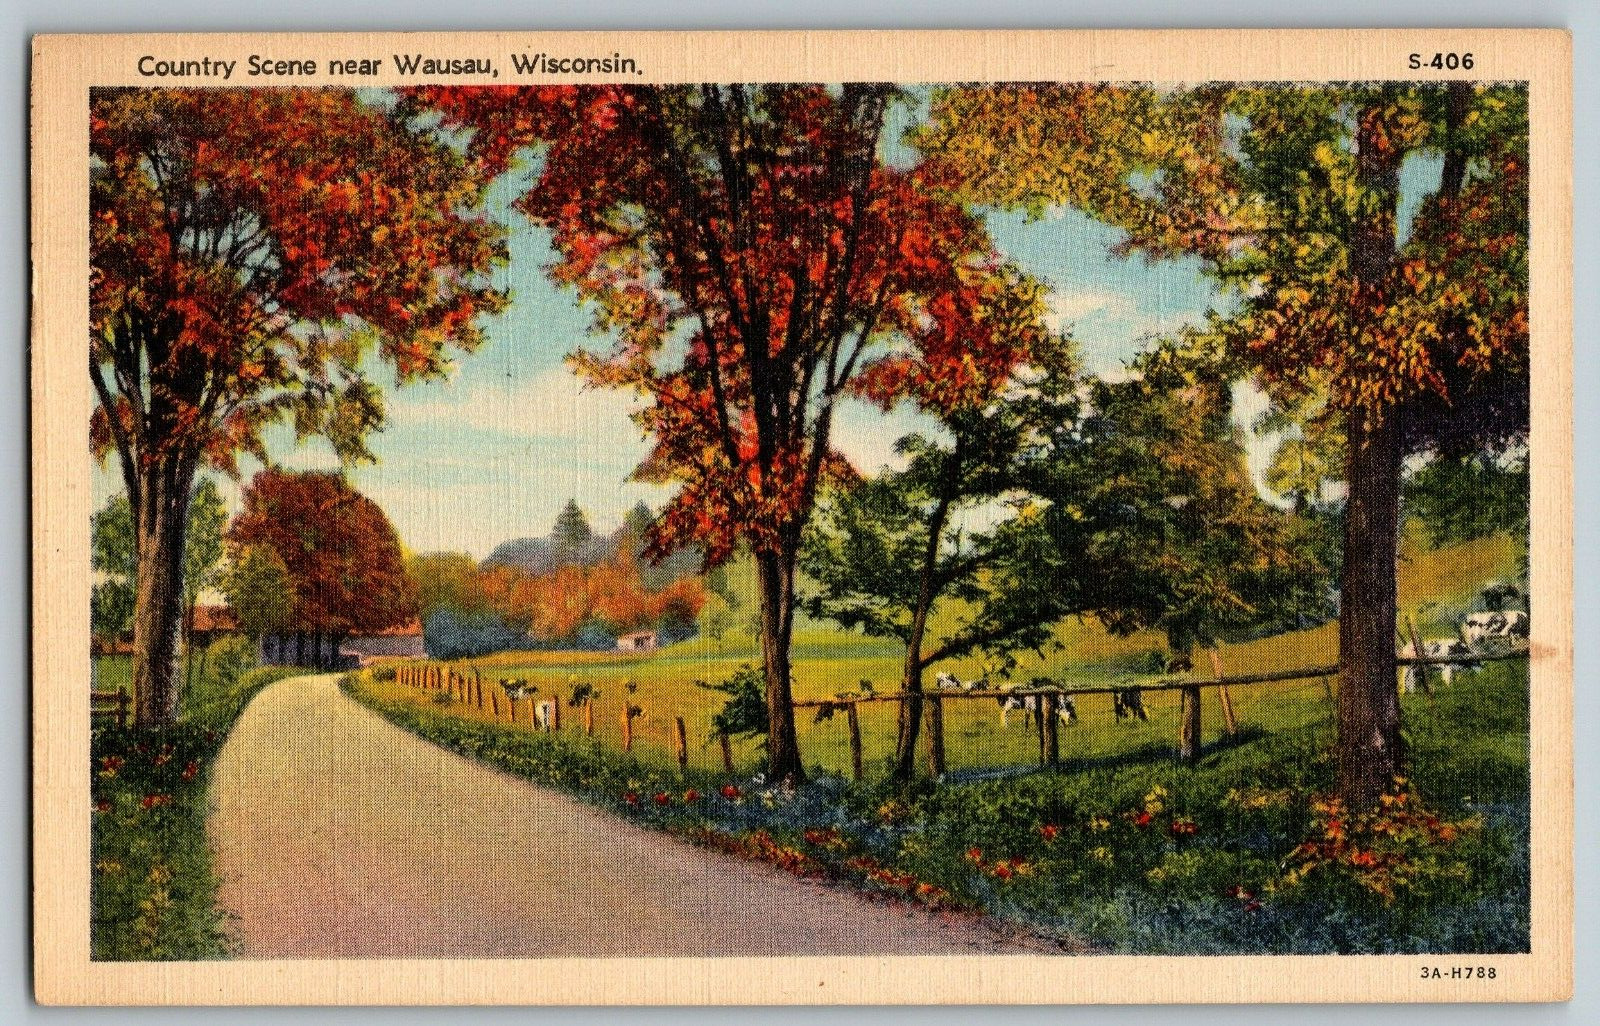 Wausau, Wisconsin - Country Scene - Vintage Postcards - Posted 1946